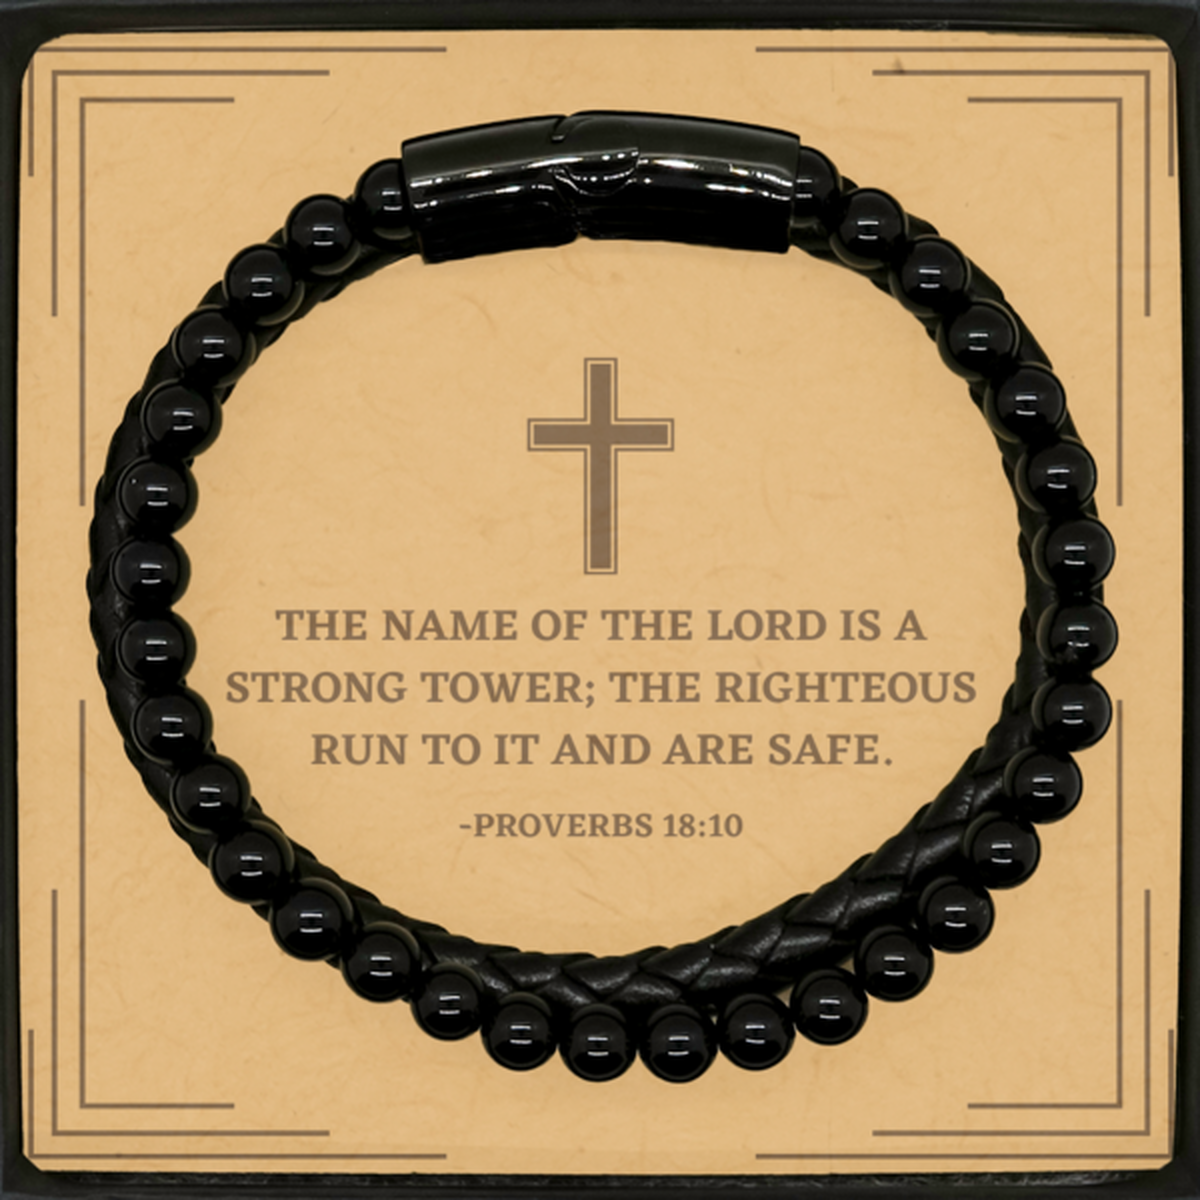 Baptism Gifts For Teenage Boys Girls, Christian Bible Verse Stone Leather Bracelet, The name of the Lord is a strong, Confirmation Gifts, Bible Verse Card for Son, Godson, Grandson